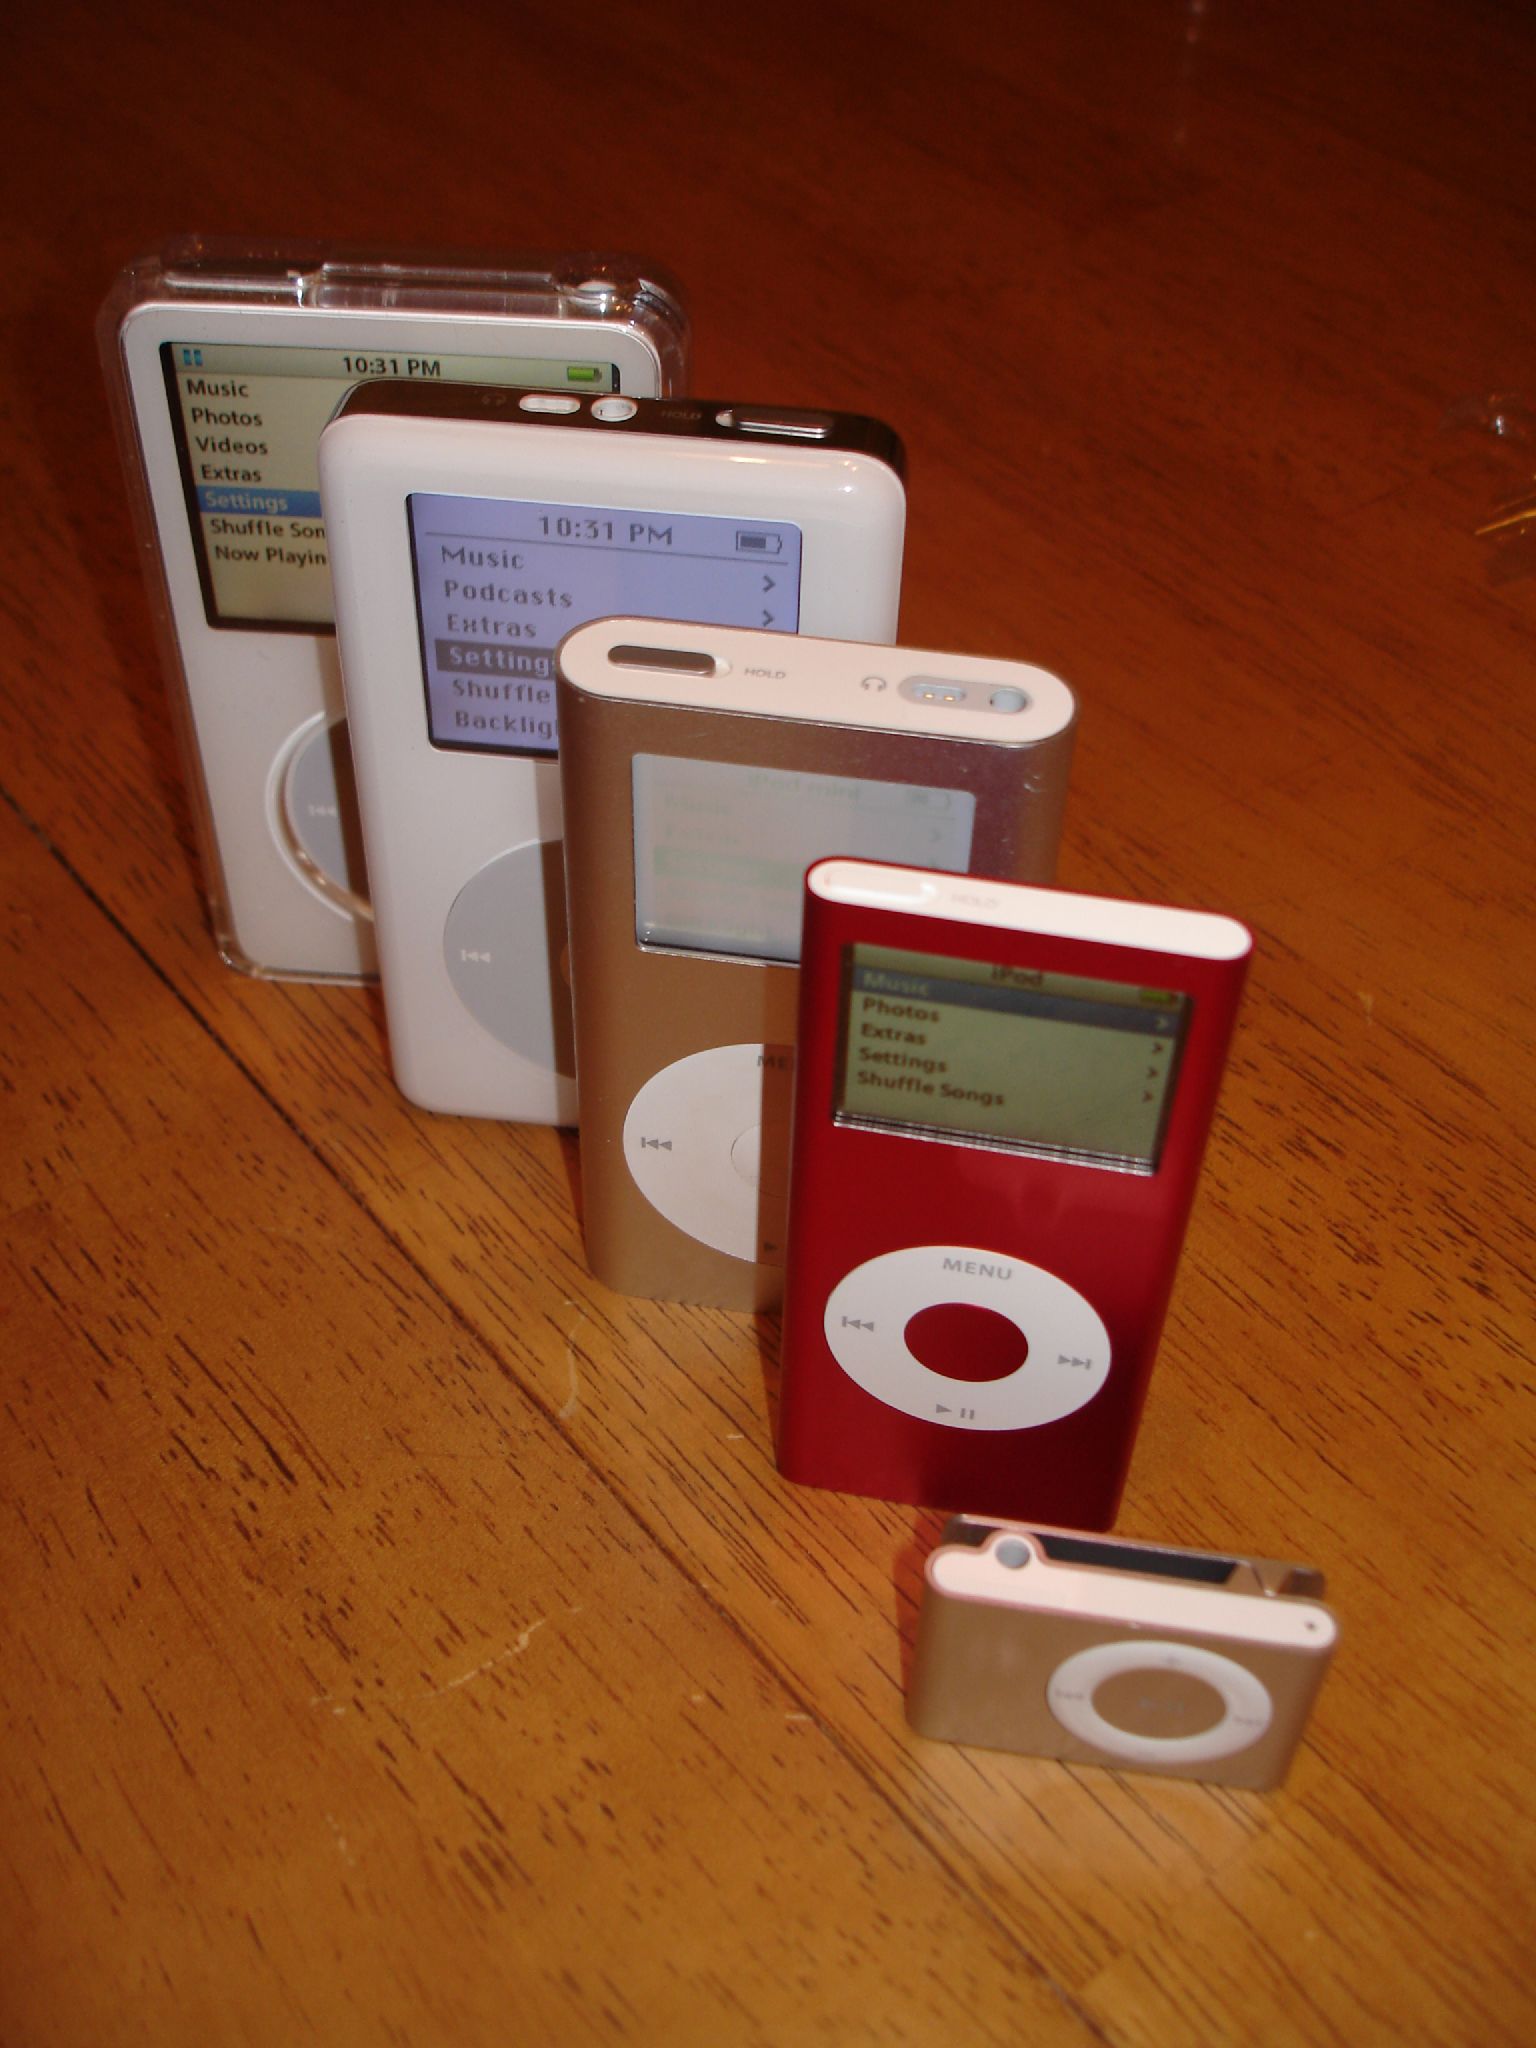 File:Various iPods.jpg - Wikipedia, the free encyclopedia